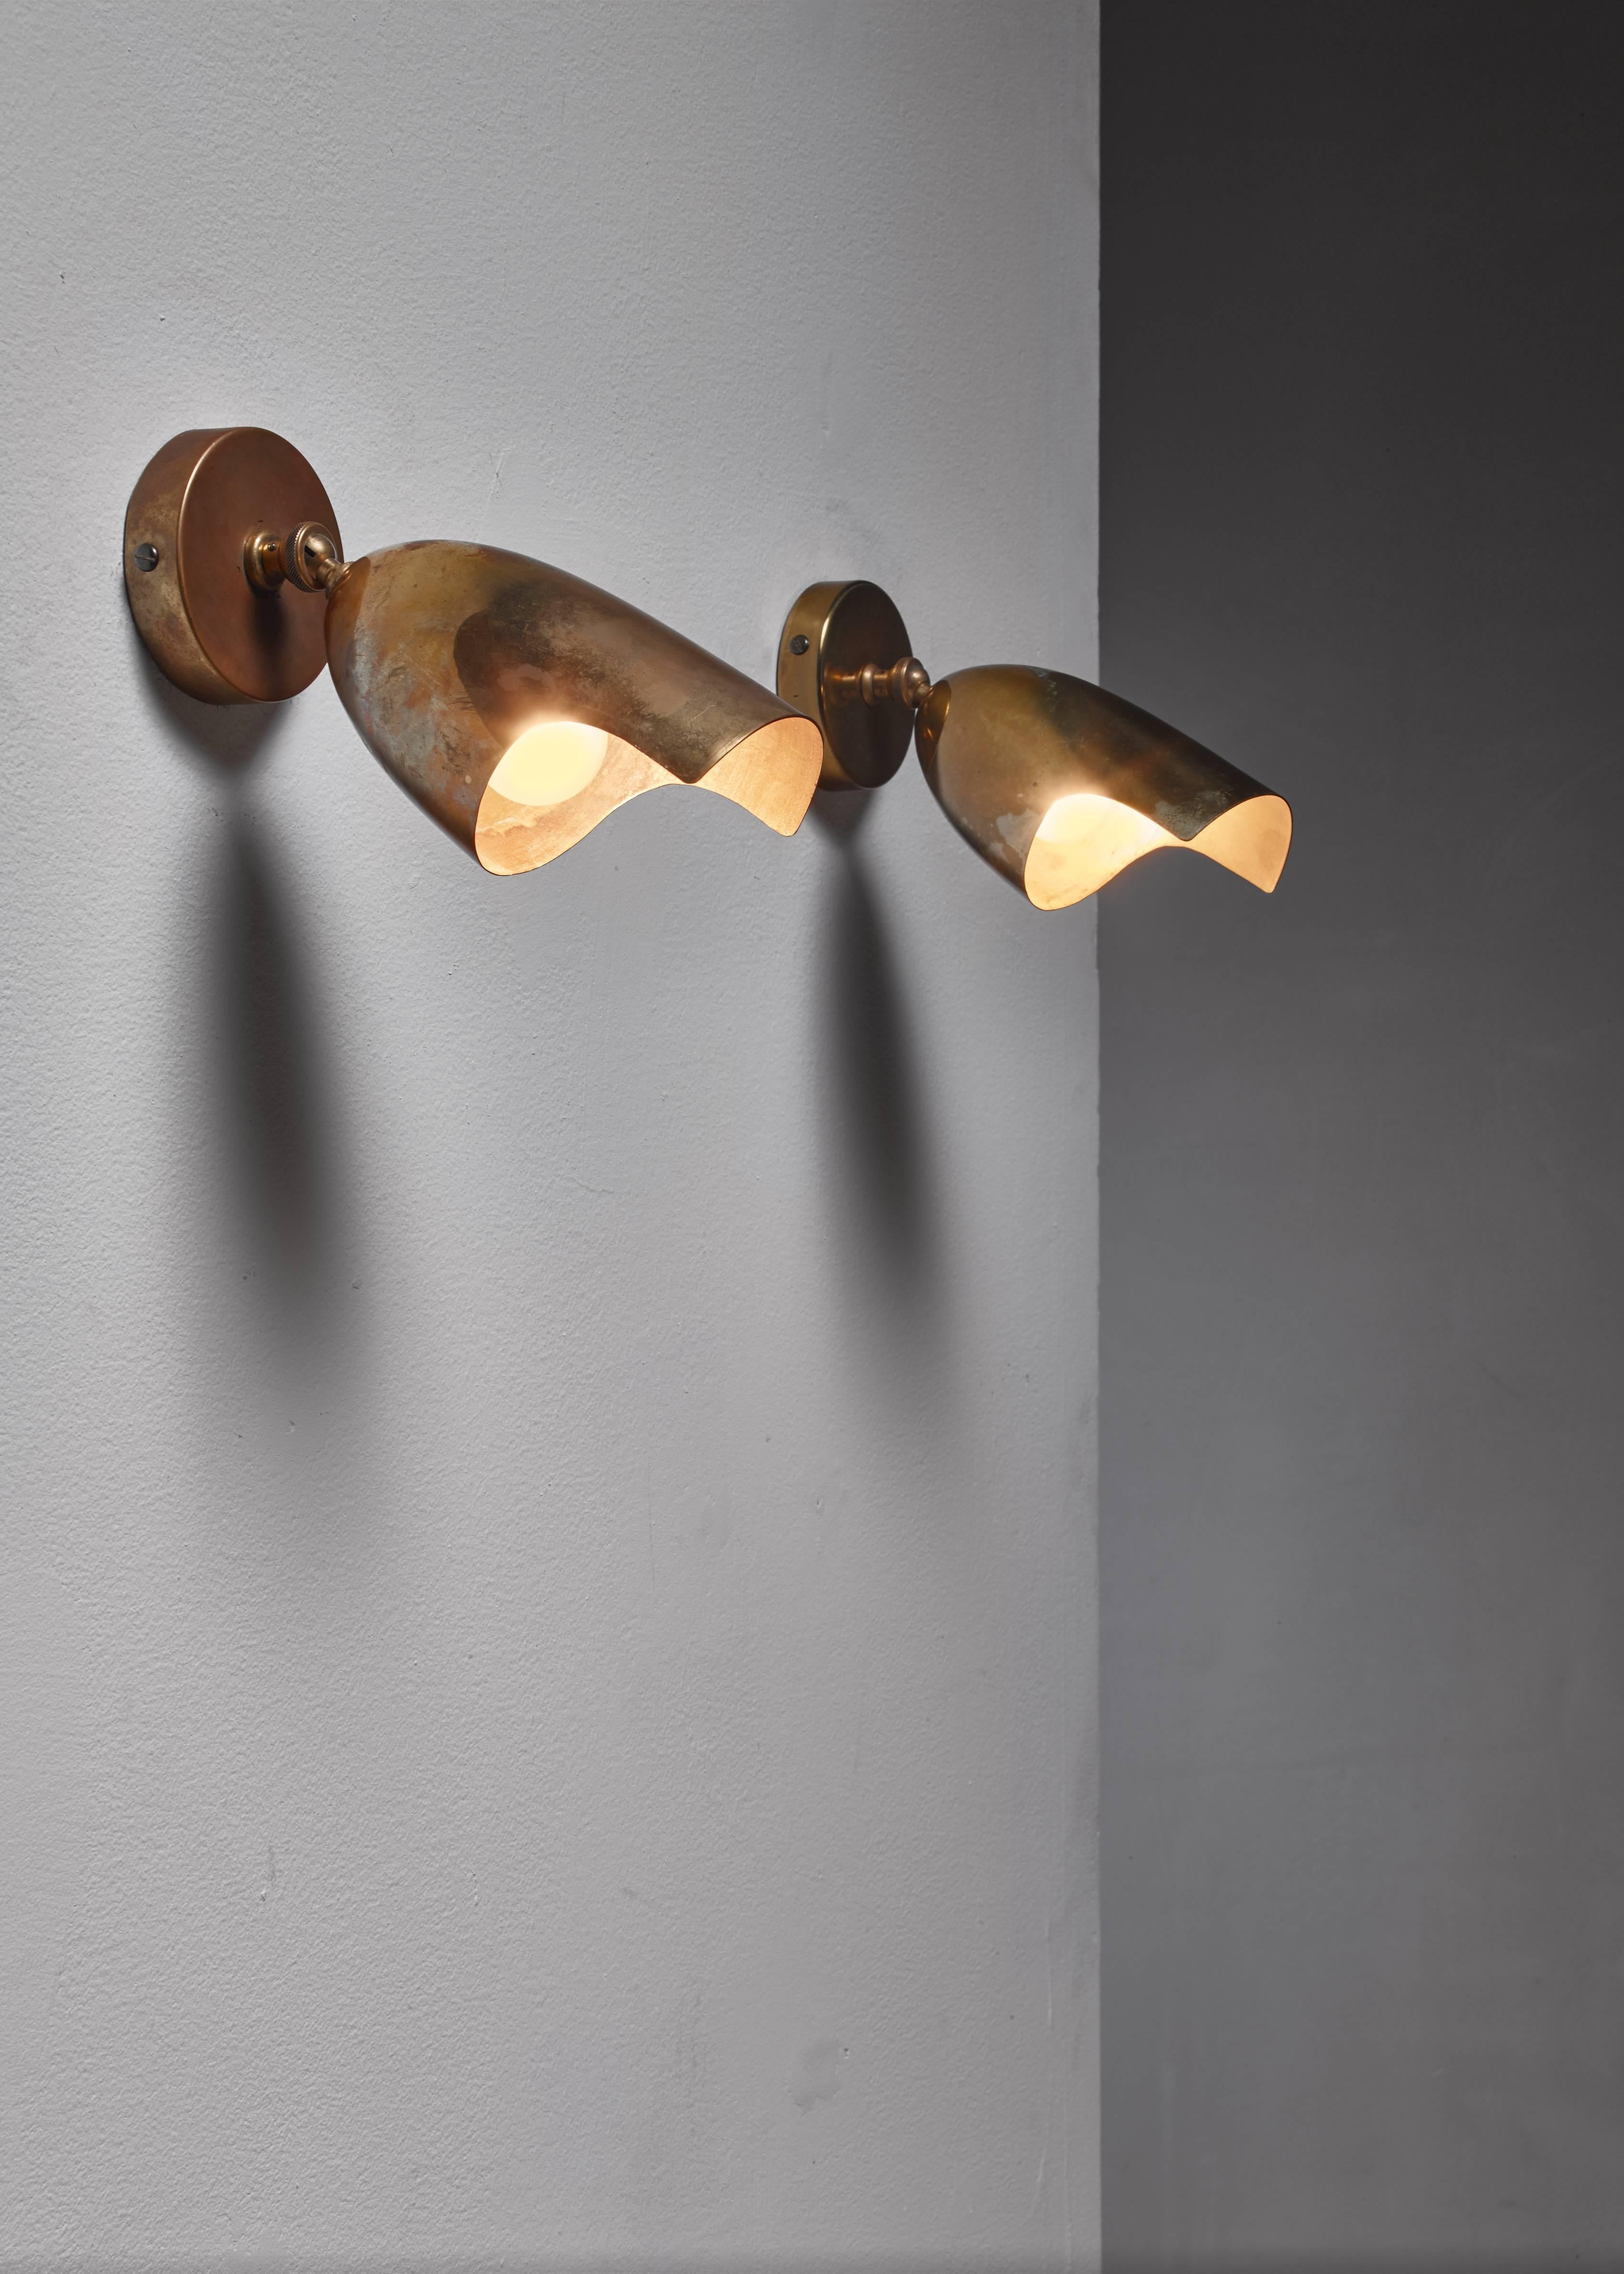 A set of two pivoting brass wall appliqués, labelled by Idman. They have a slight difference in patina. These lamps are from Idman's heyday of the 1950s, when the company produced lamps by the greatest Finnish designers, like Paavo Tynell and Mauri